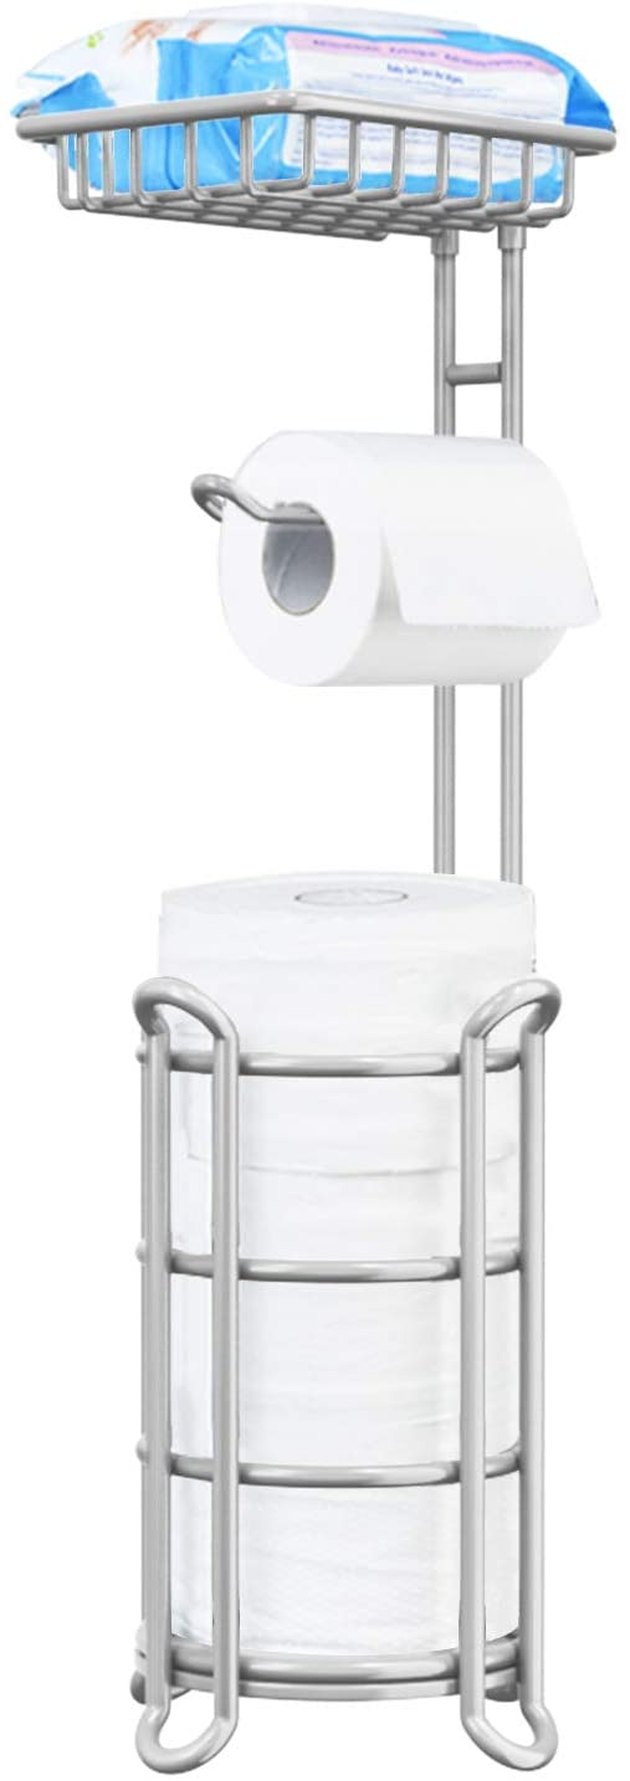 Have extra toilet paper within reach with this freestanding toilet paper holder. It has a dispenser, room for extra toilet paper rolls, and an extra compartment on top for any other bathroom essentials.